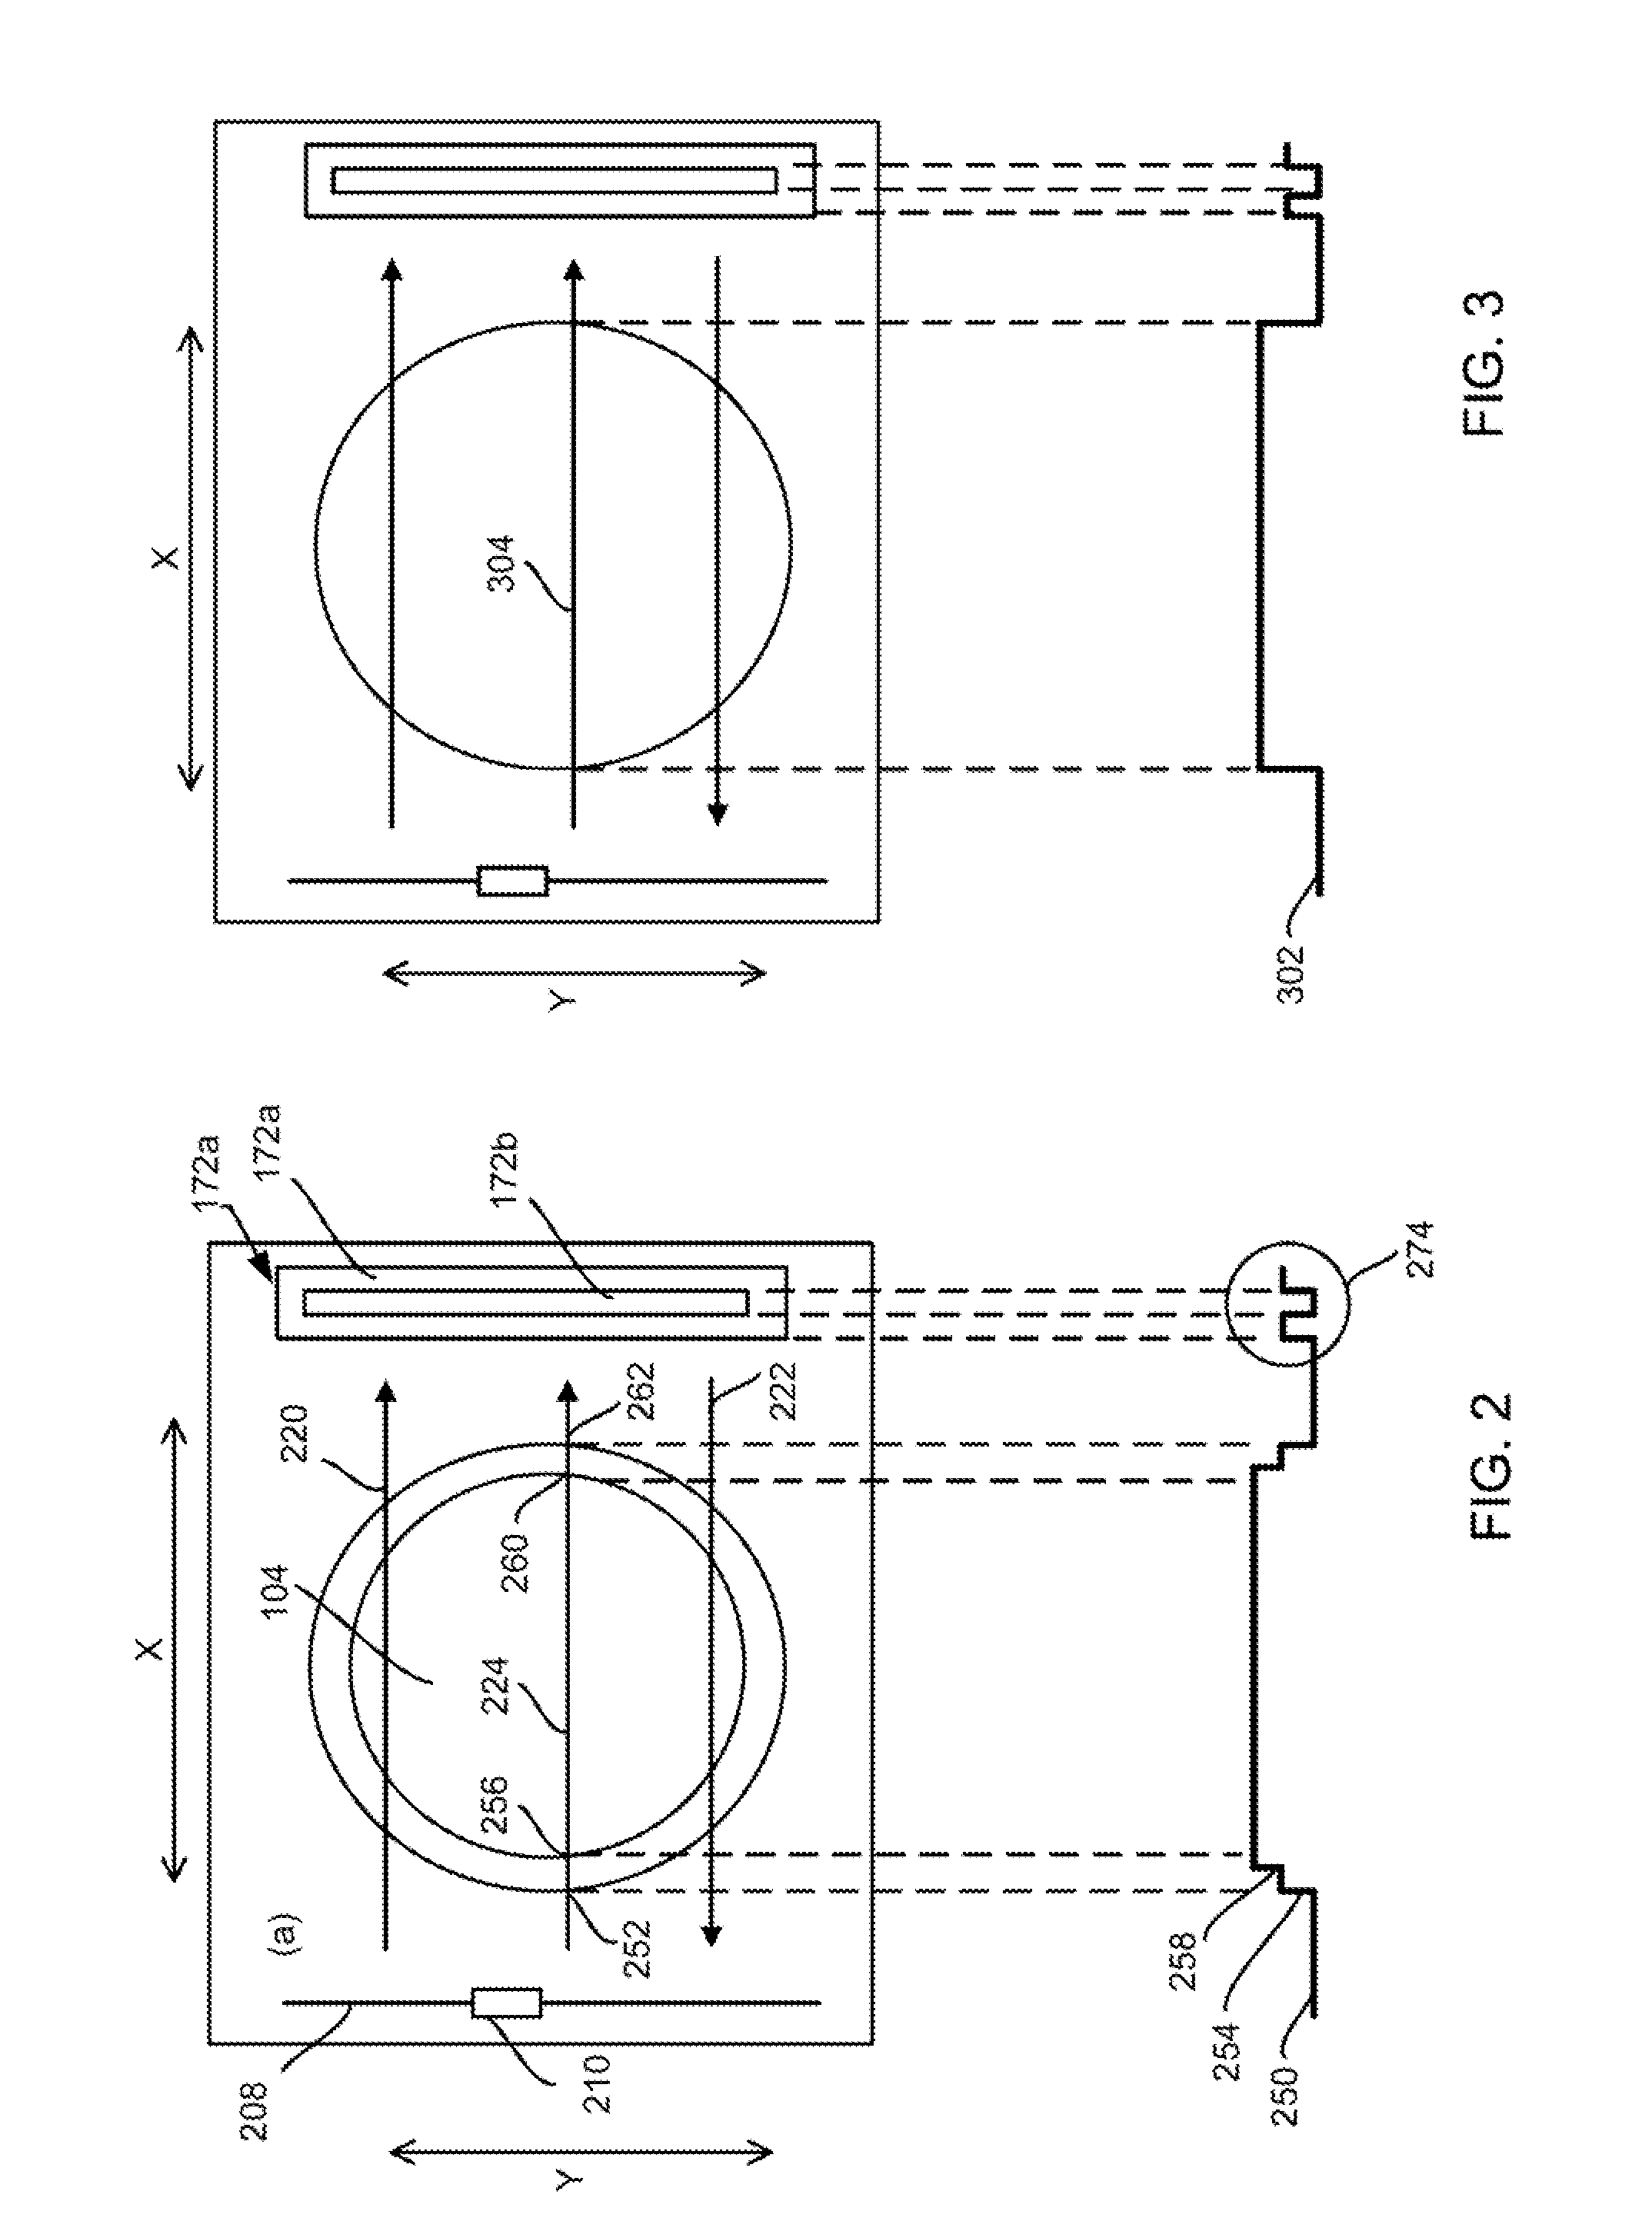 Arrangements and methods for determining positions and offsets